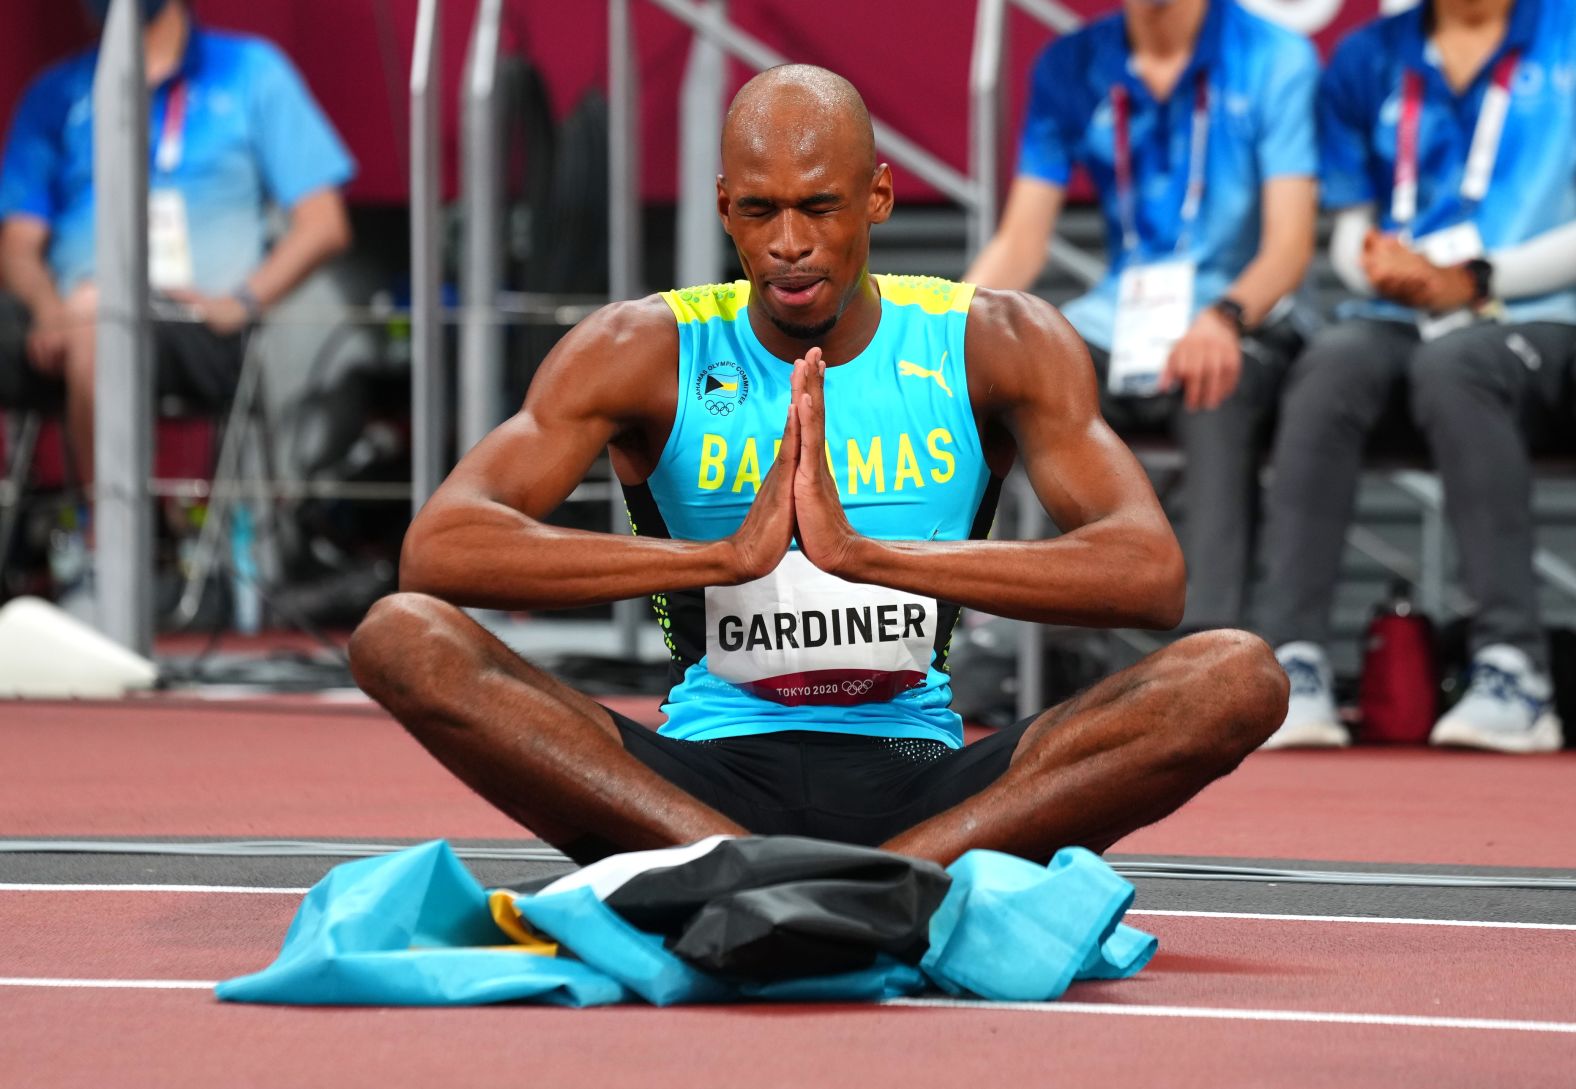 The Bahamas' Steven Gardiner reacts after<a href="index.php?page=&url=https%3A%2F%2Fwww.cnn.com%2Fworld%2Flive-news%2Ftokyo-2020-olympics-08-05-21-spt%2Fh_fbfe1128351faa8afe40eb53969f98df" target="_blank"> winning gold in the men's 400 meters</a> on August 5.